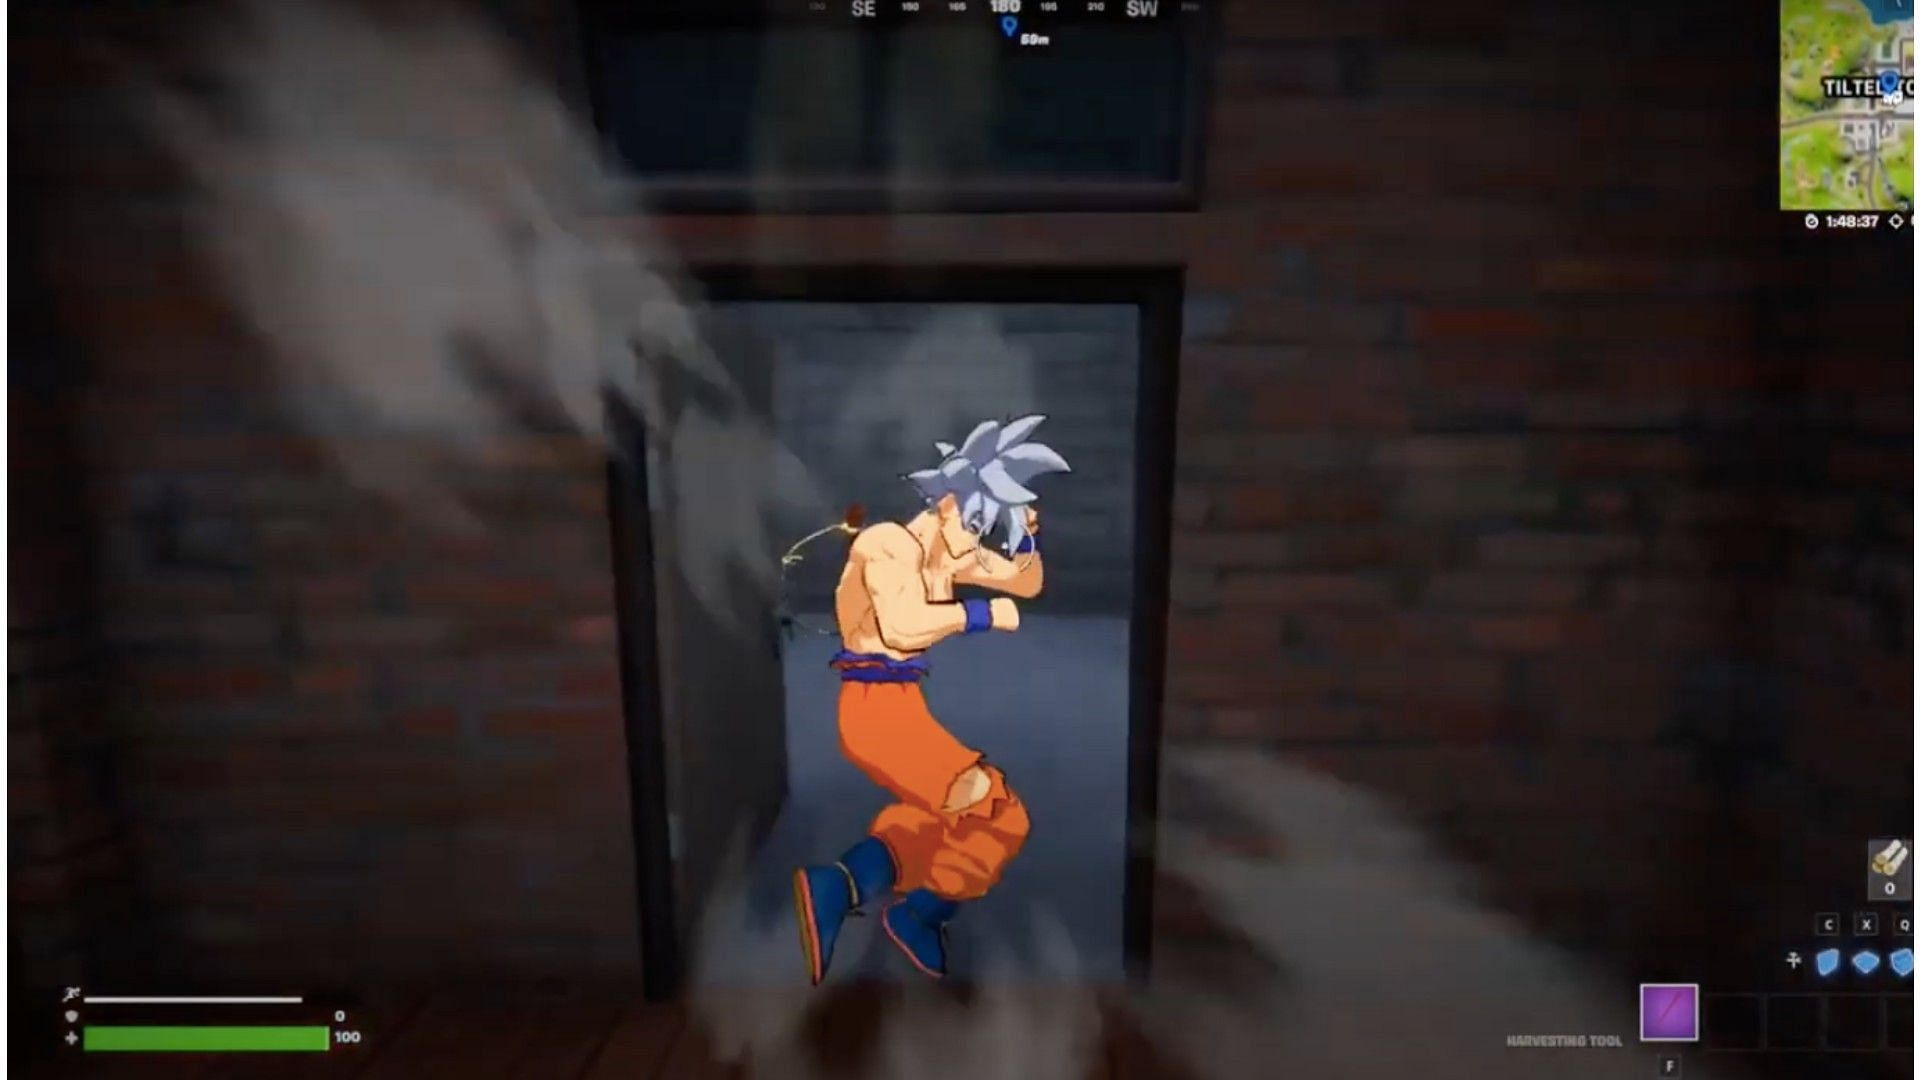 Use tactical sprint while running to bust through doors. (Image via Youtube/Noob Noob Fruit)